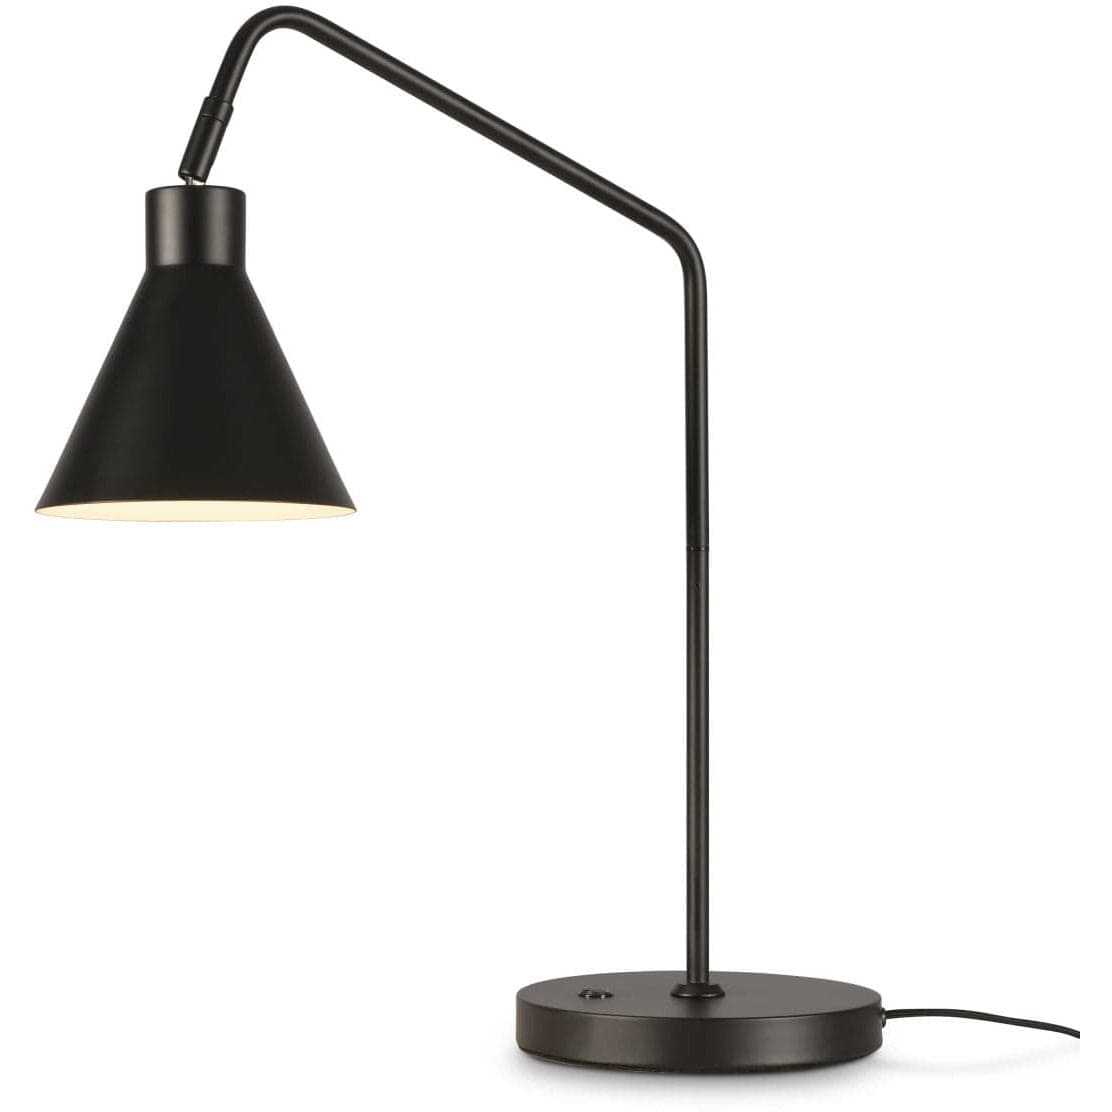 It's About RoMi Table Lamp Lyon Table Lamp